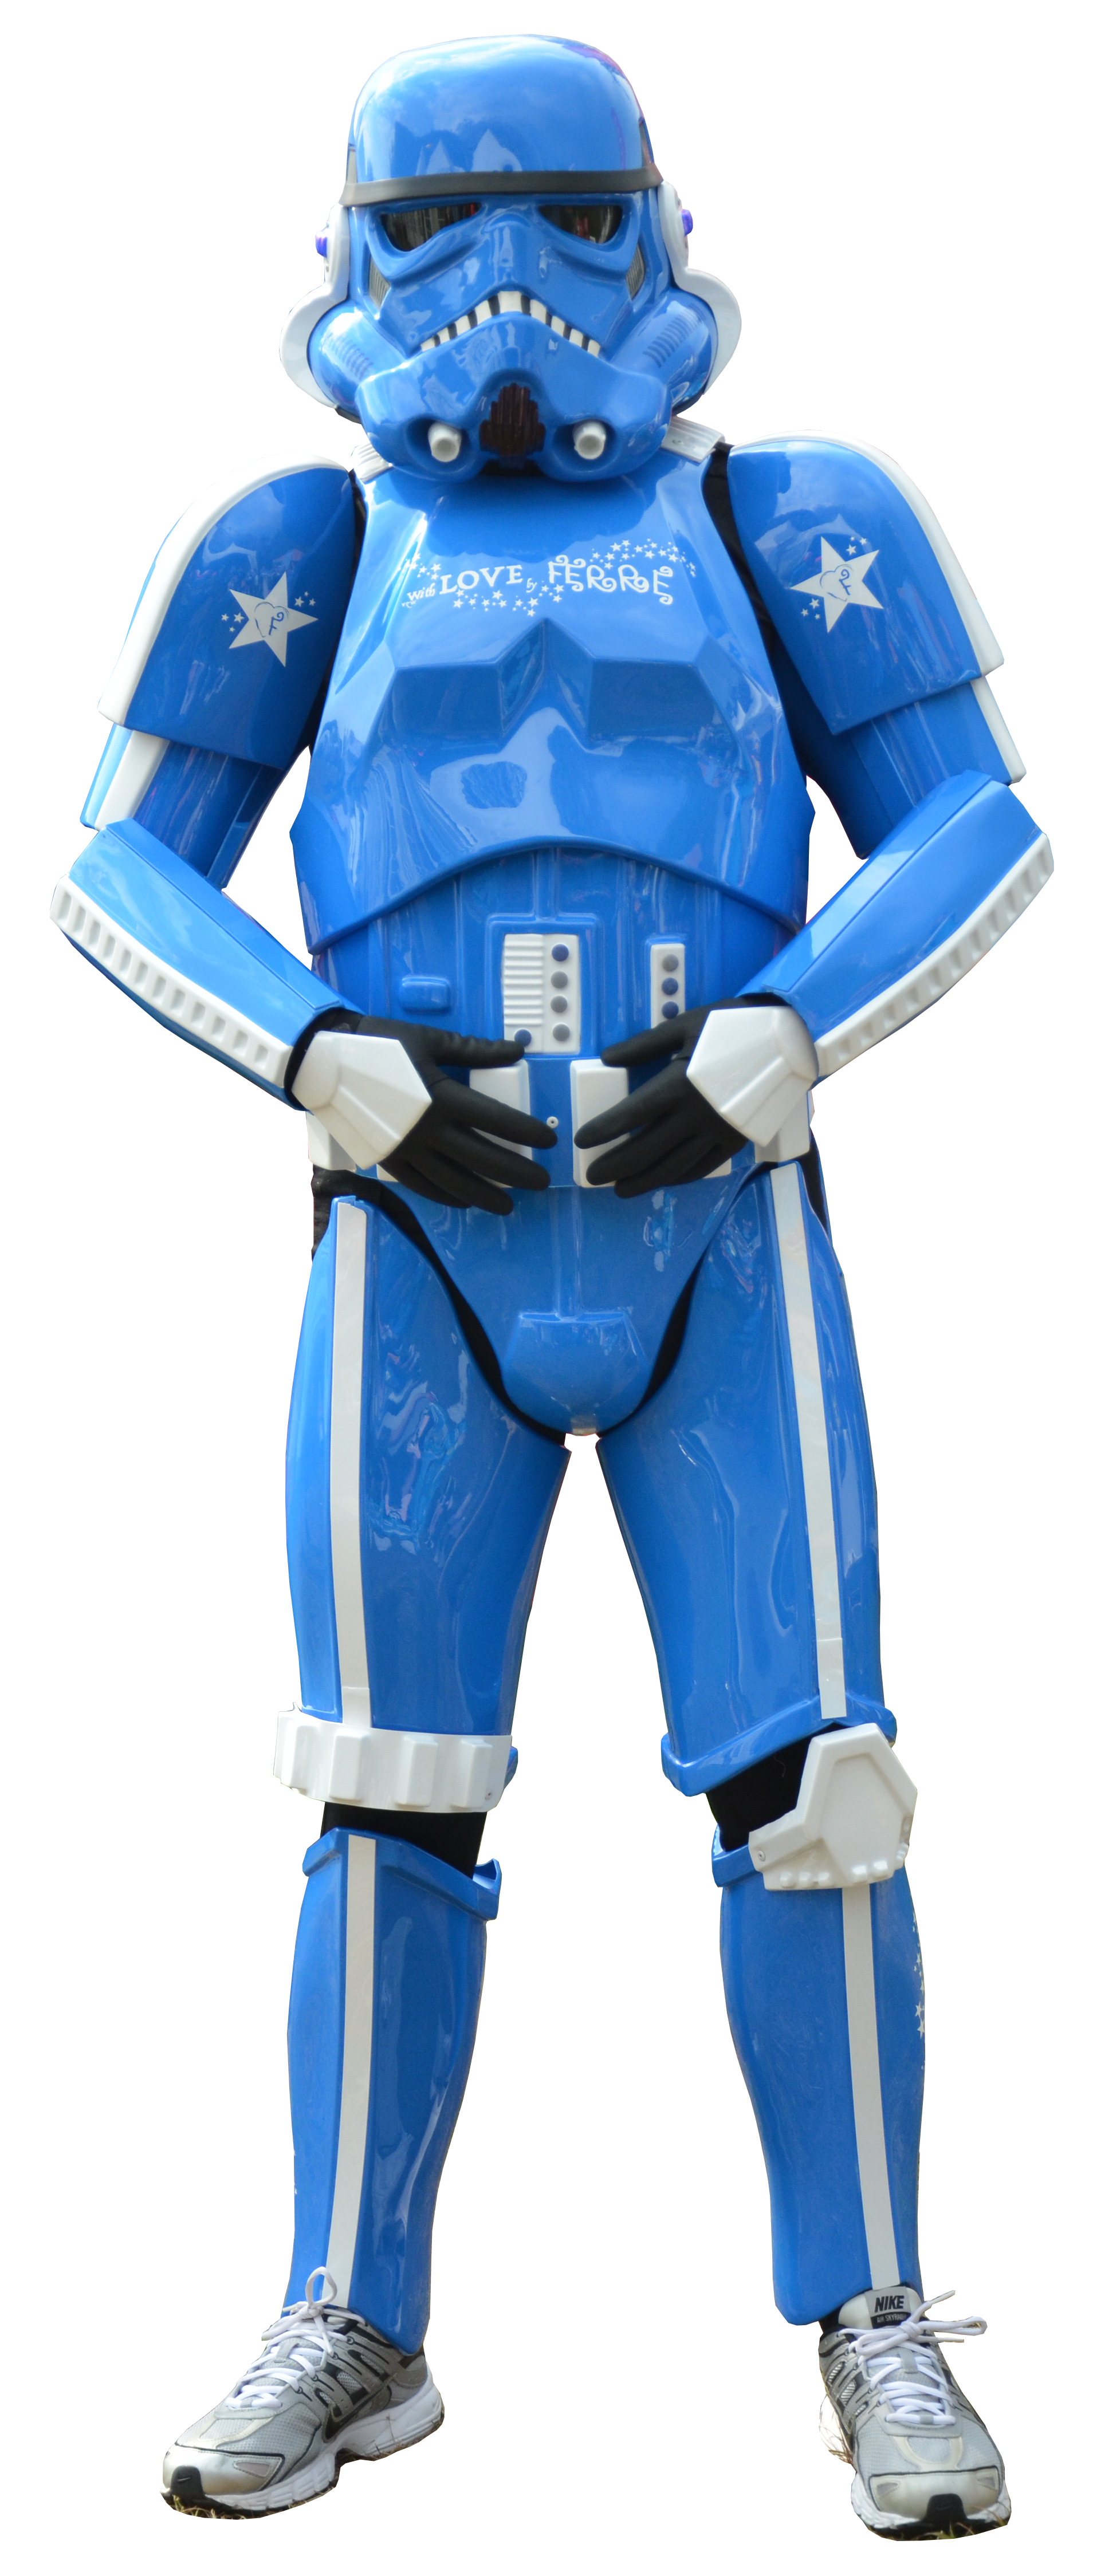 The Blue Trooper